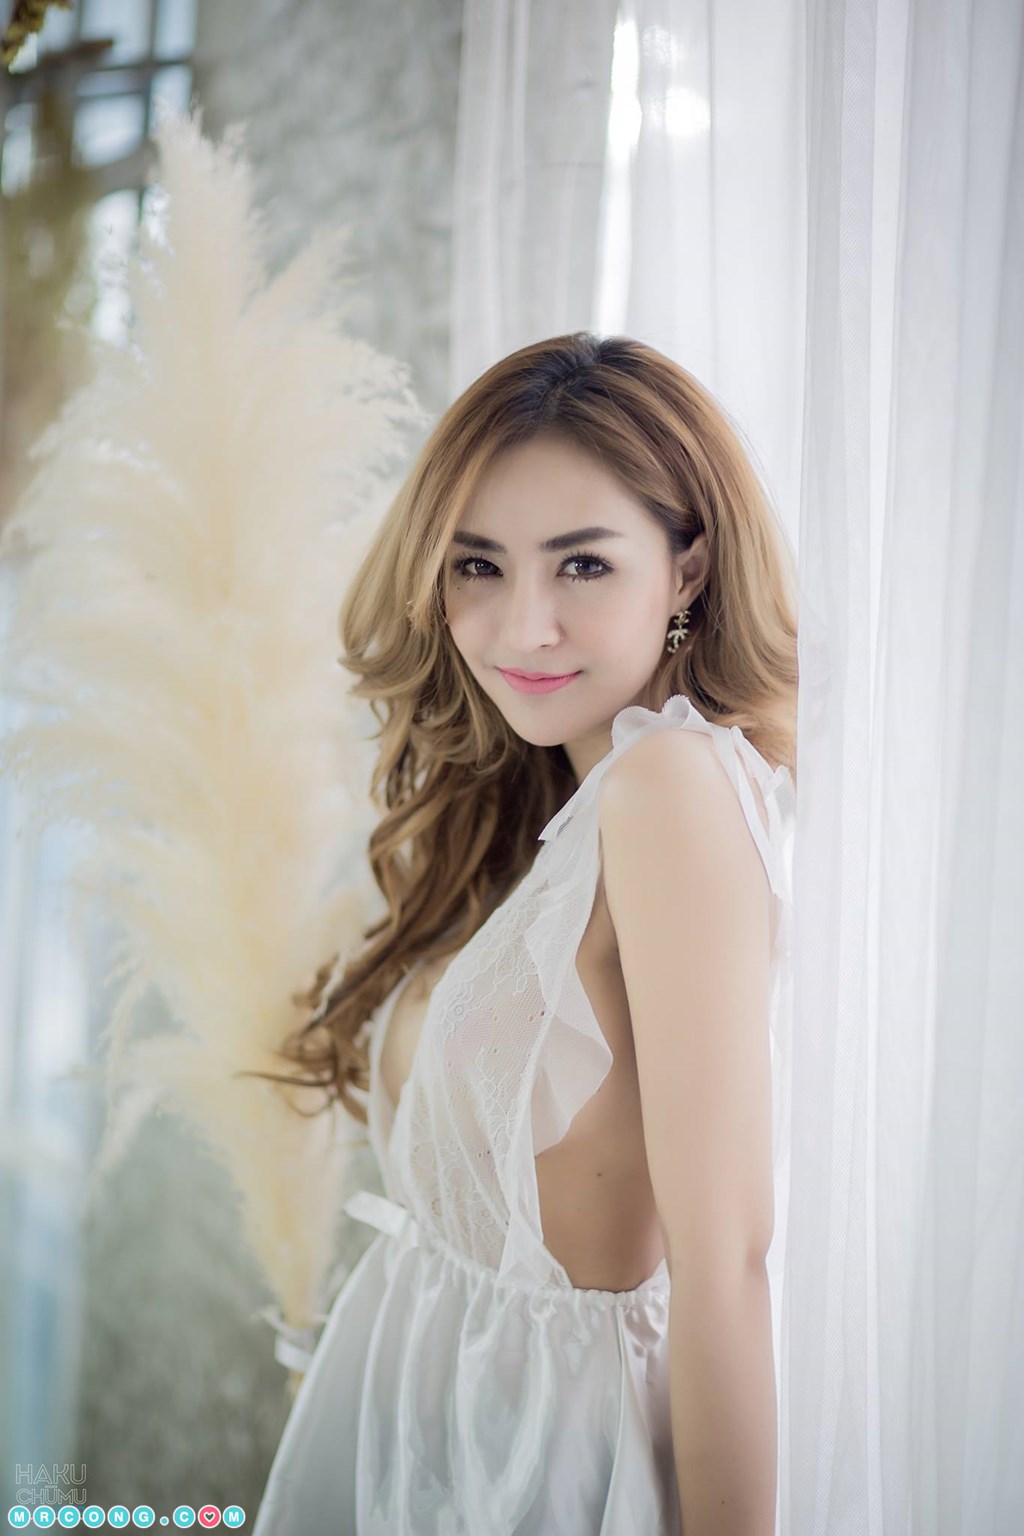 Thai Model No.247: Model Chamaiporn Boonsai (60 pictures)